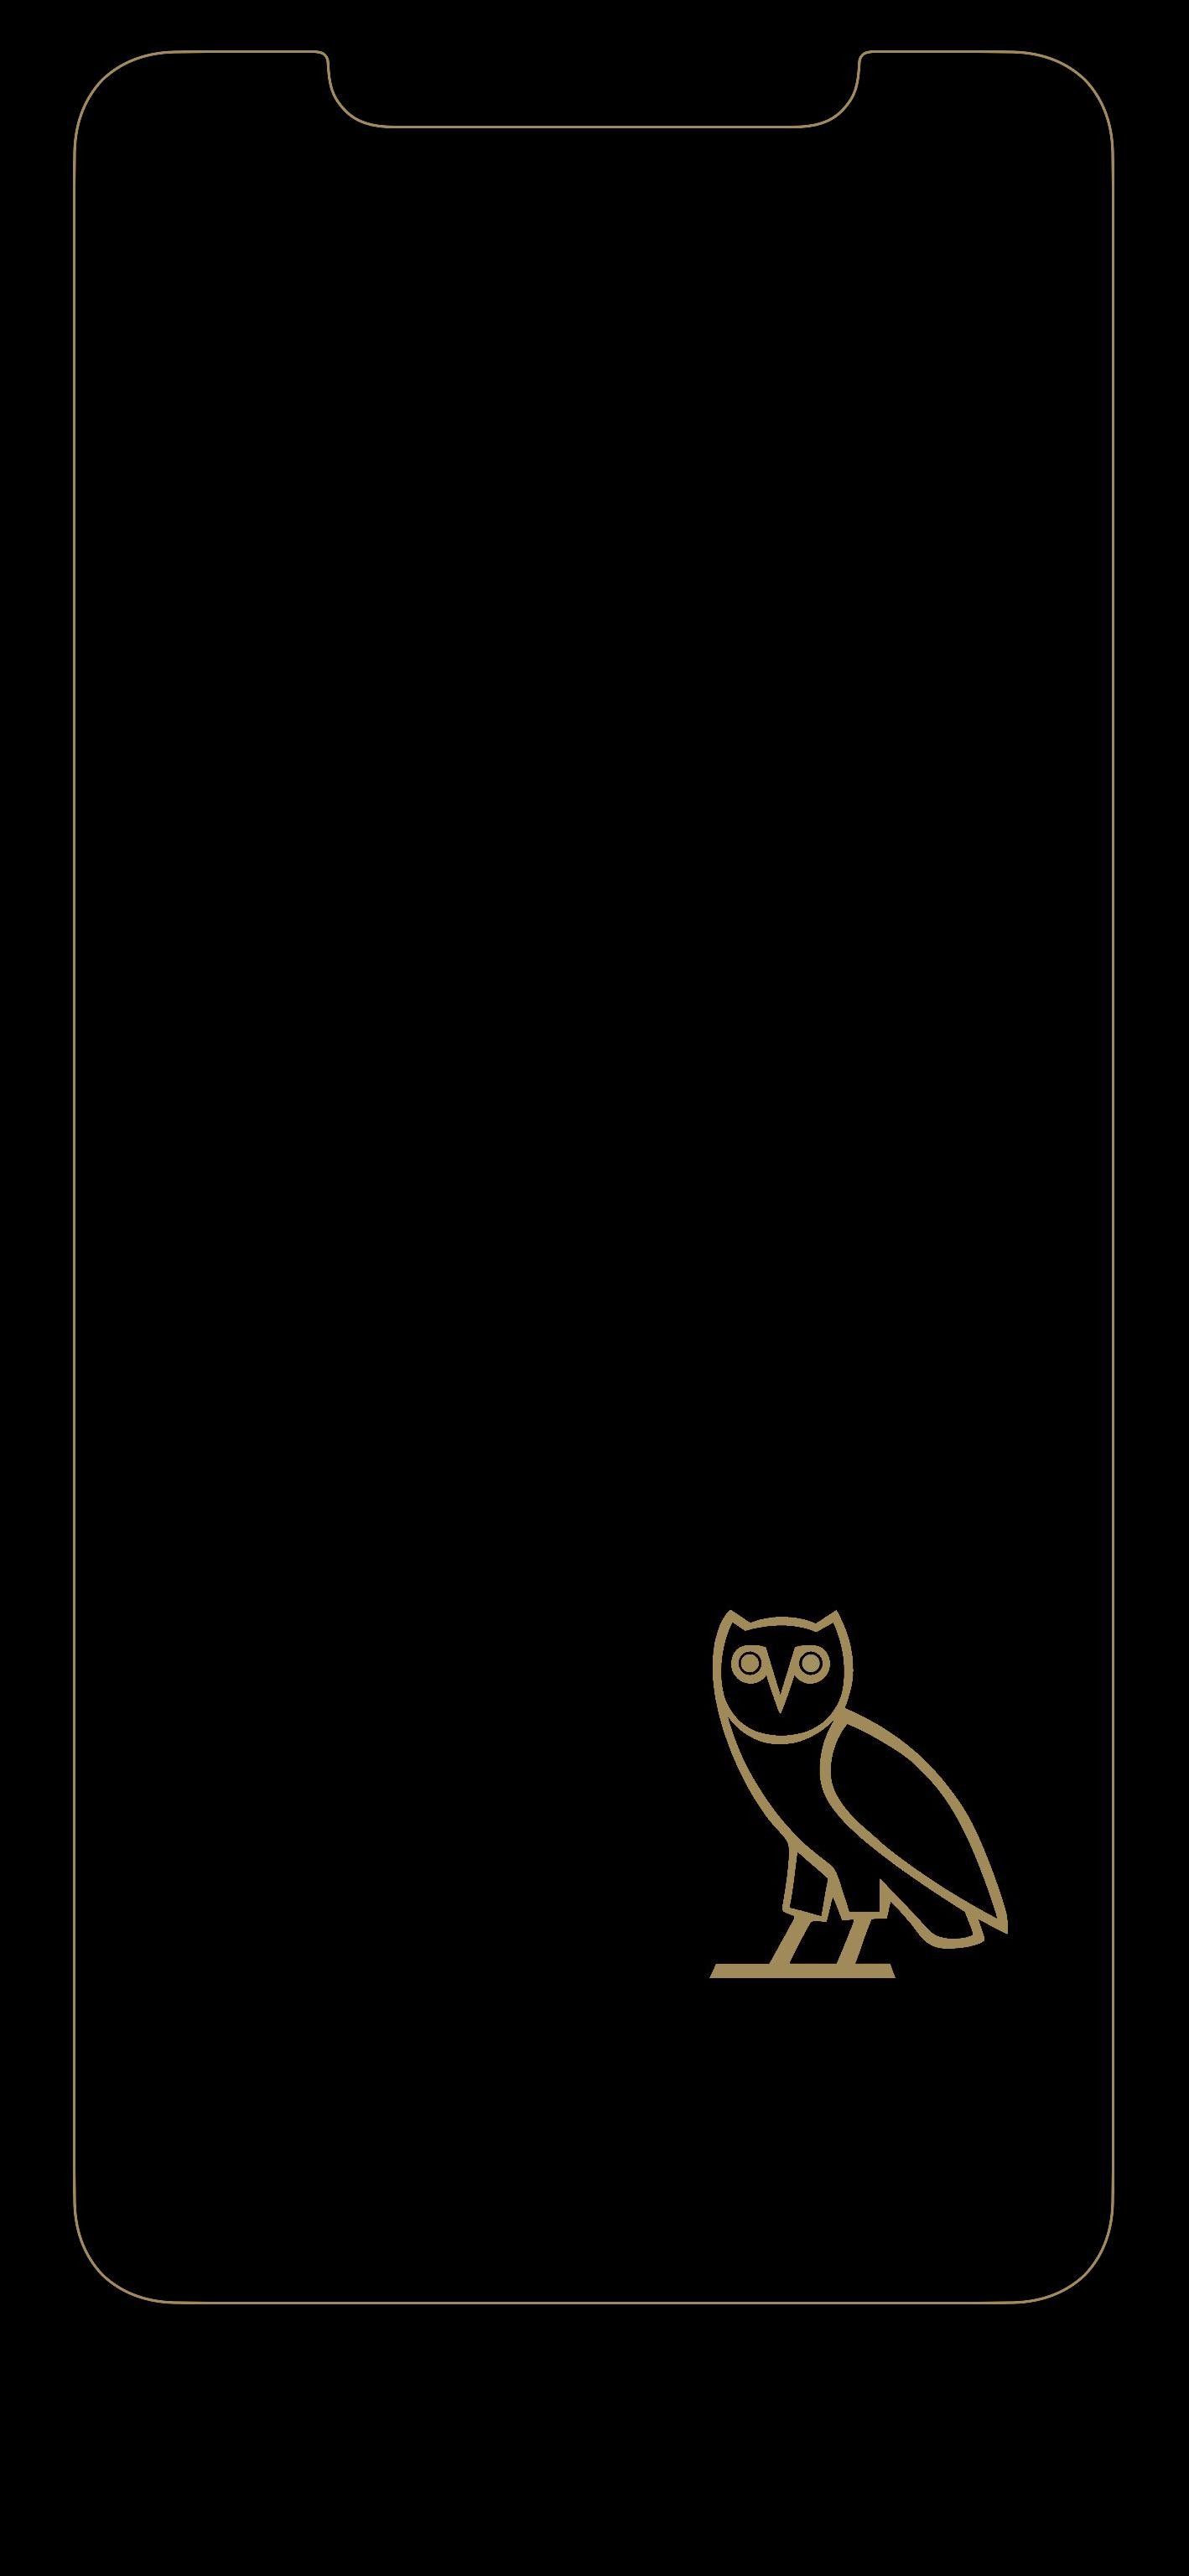 Ovoxo Iphone Wallpapers